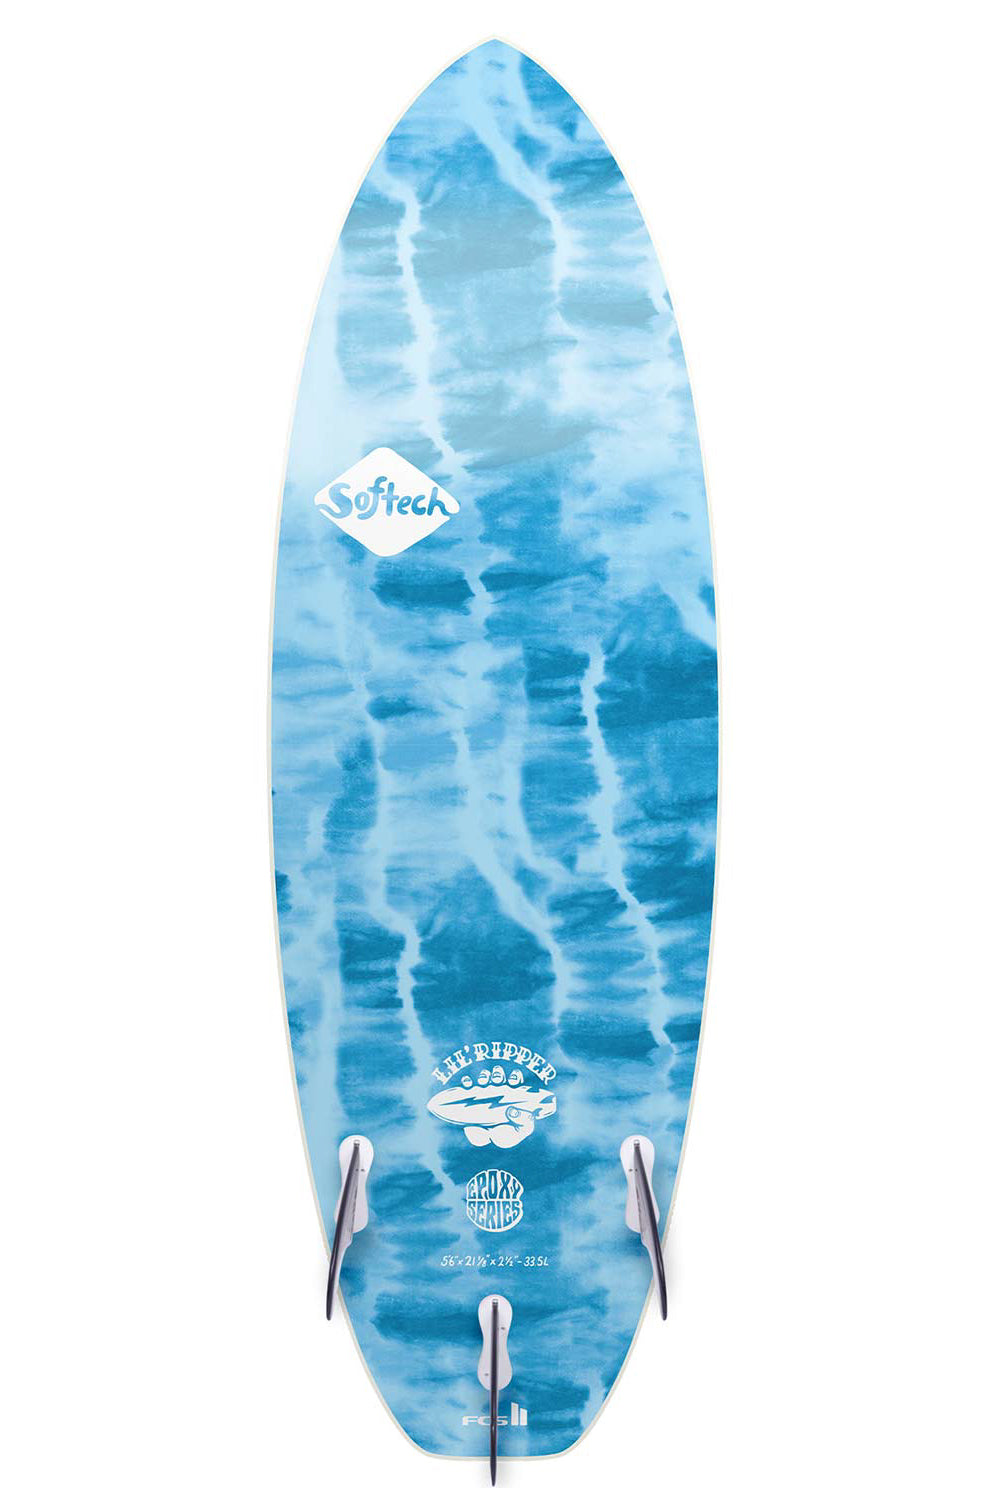 Softech Lil Ripper Softboard - Comes with fins